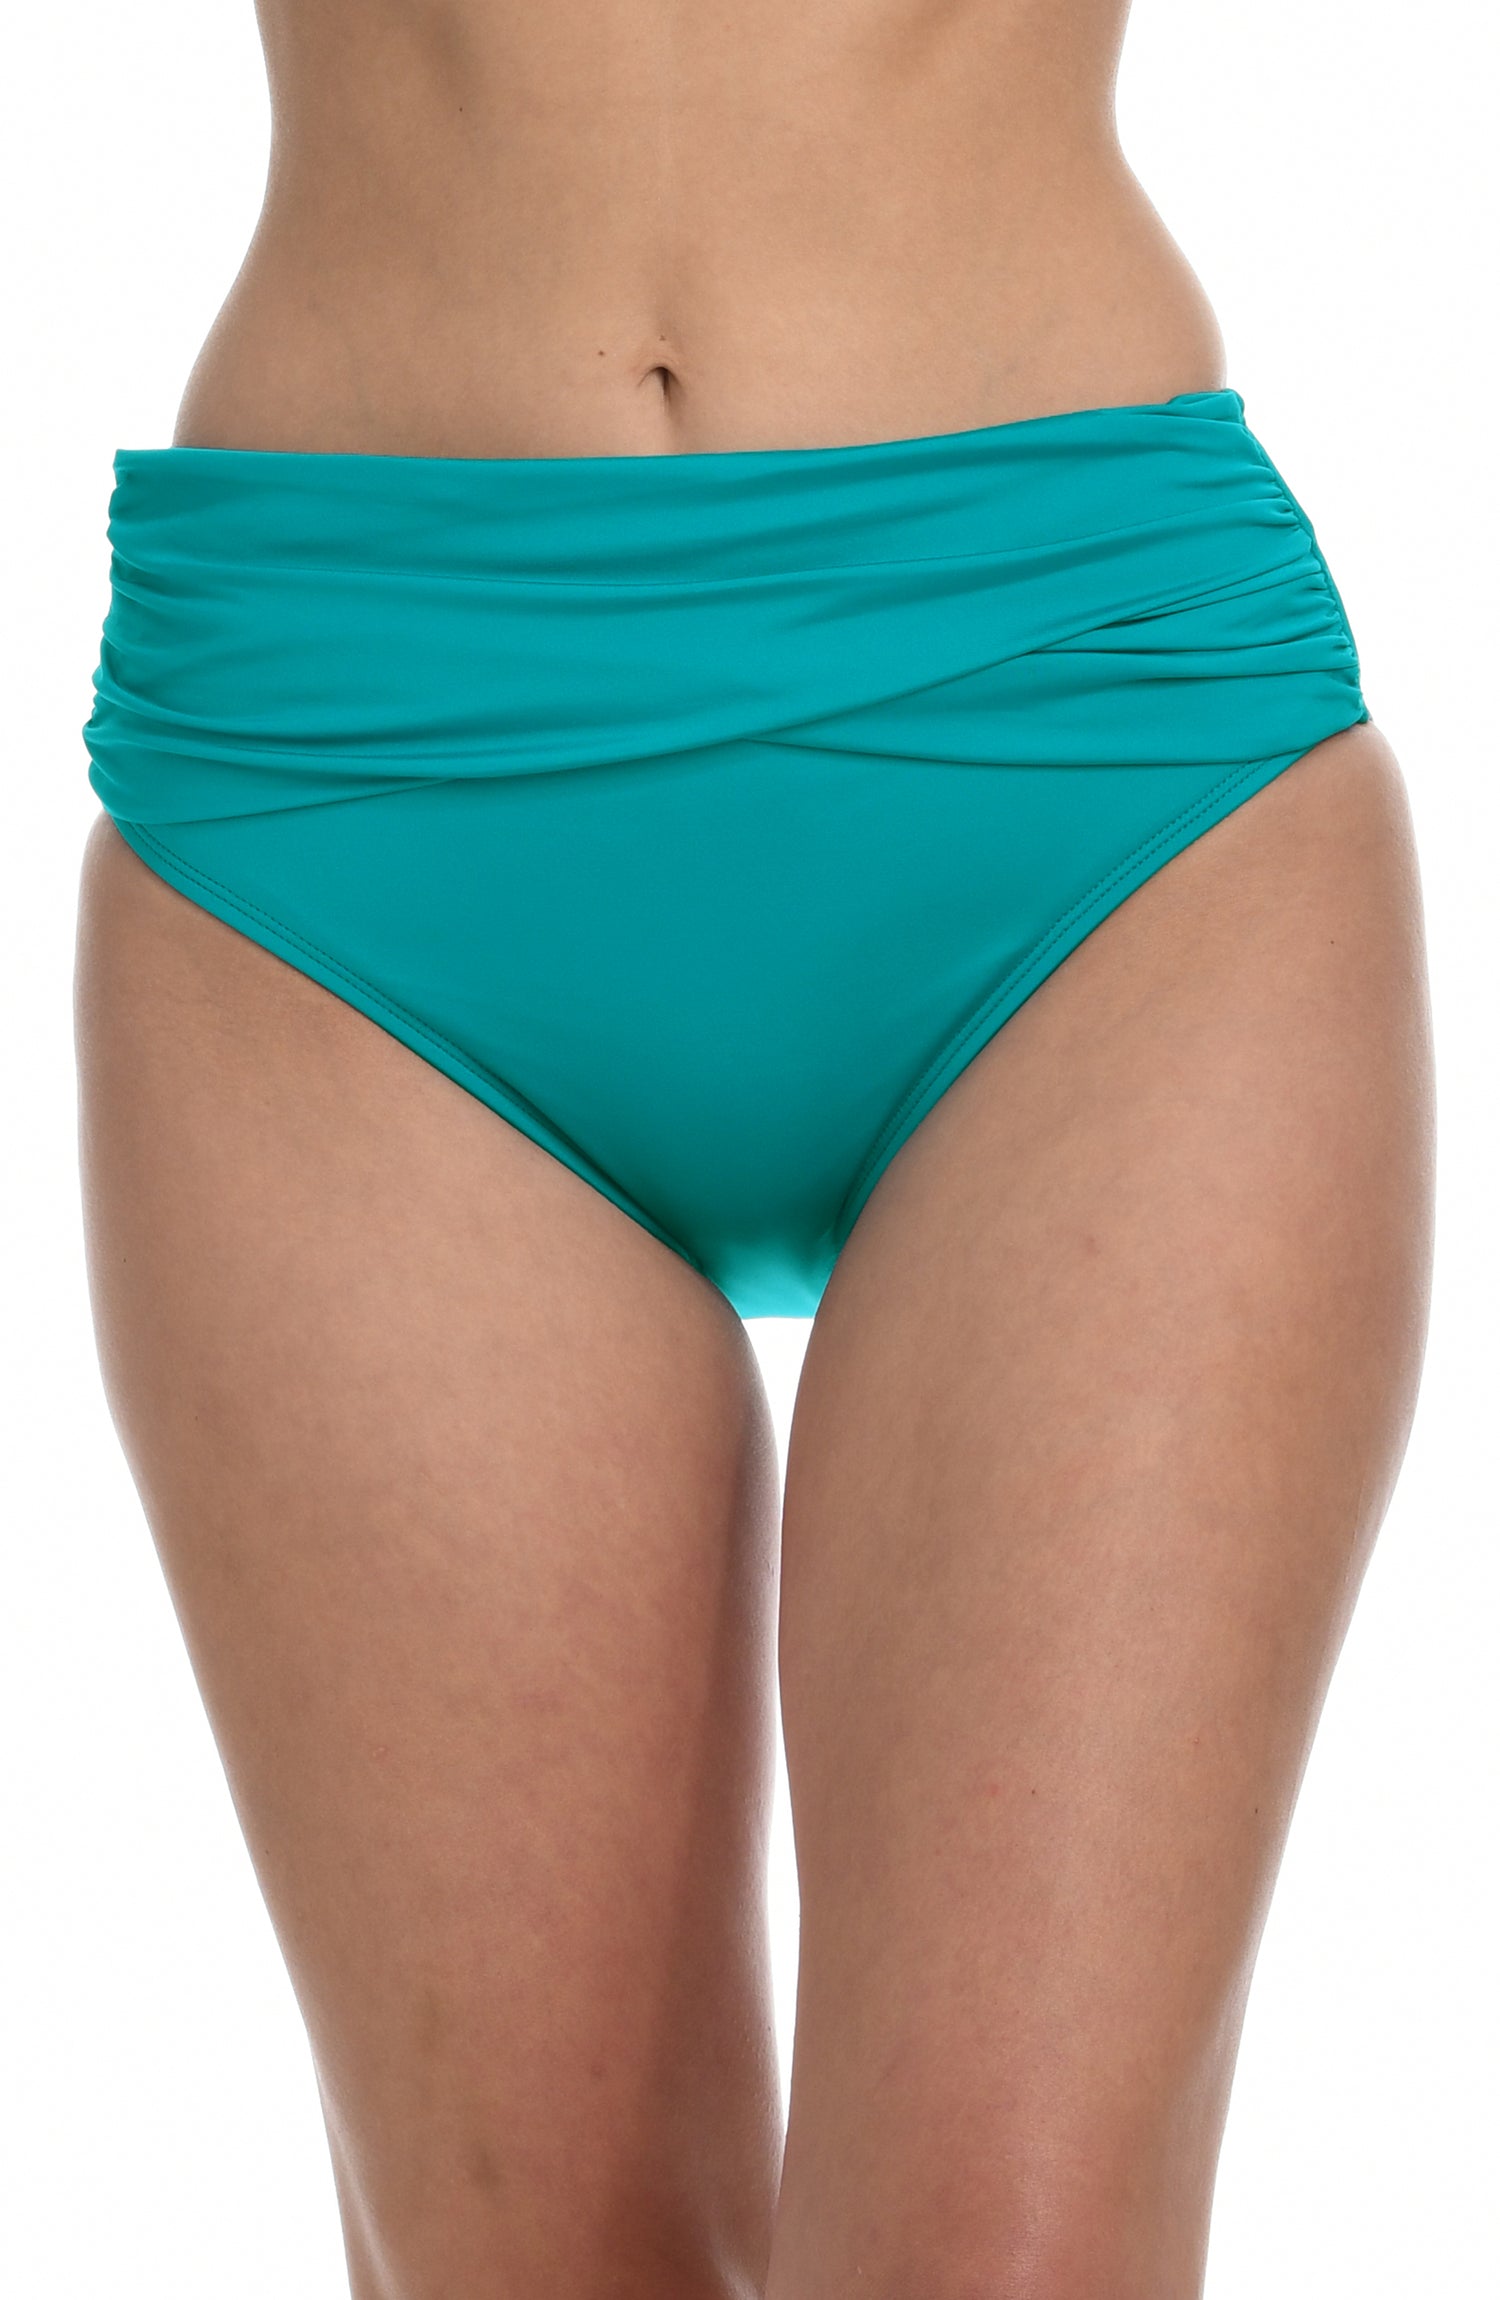 Model is wearing a turquoise colored mid-waist swimsuit bottom from our Best-Selling Island Goddess collection.